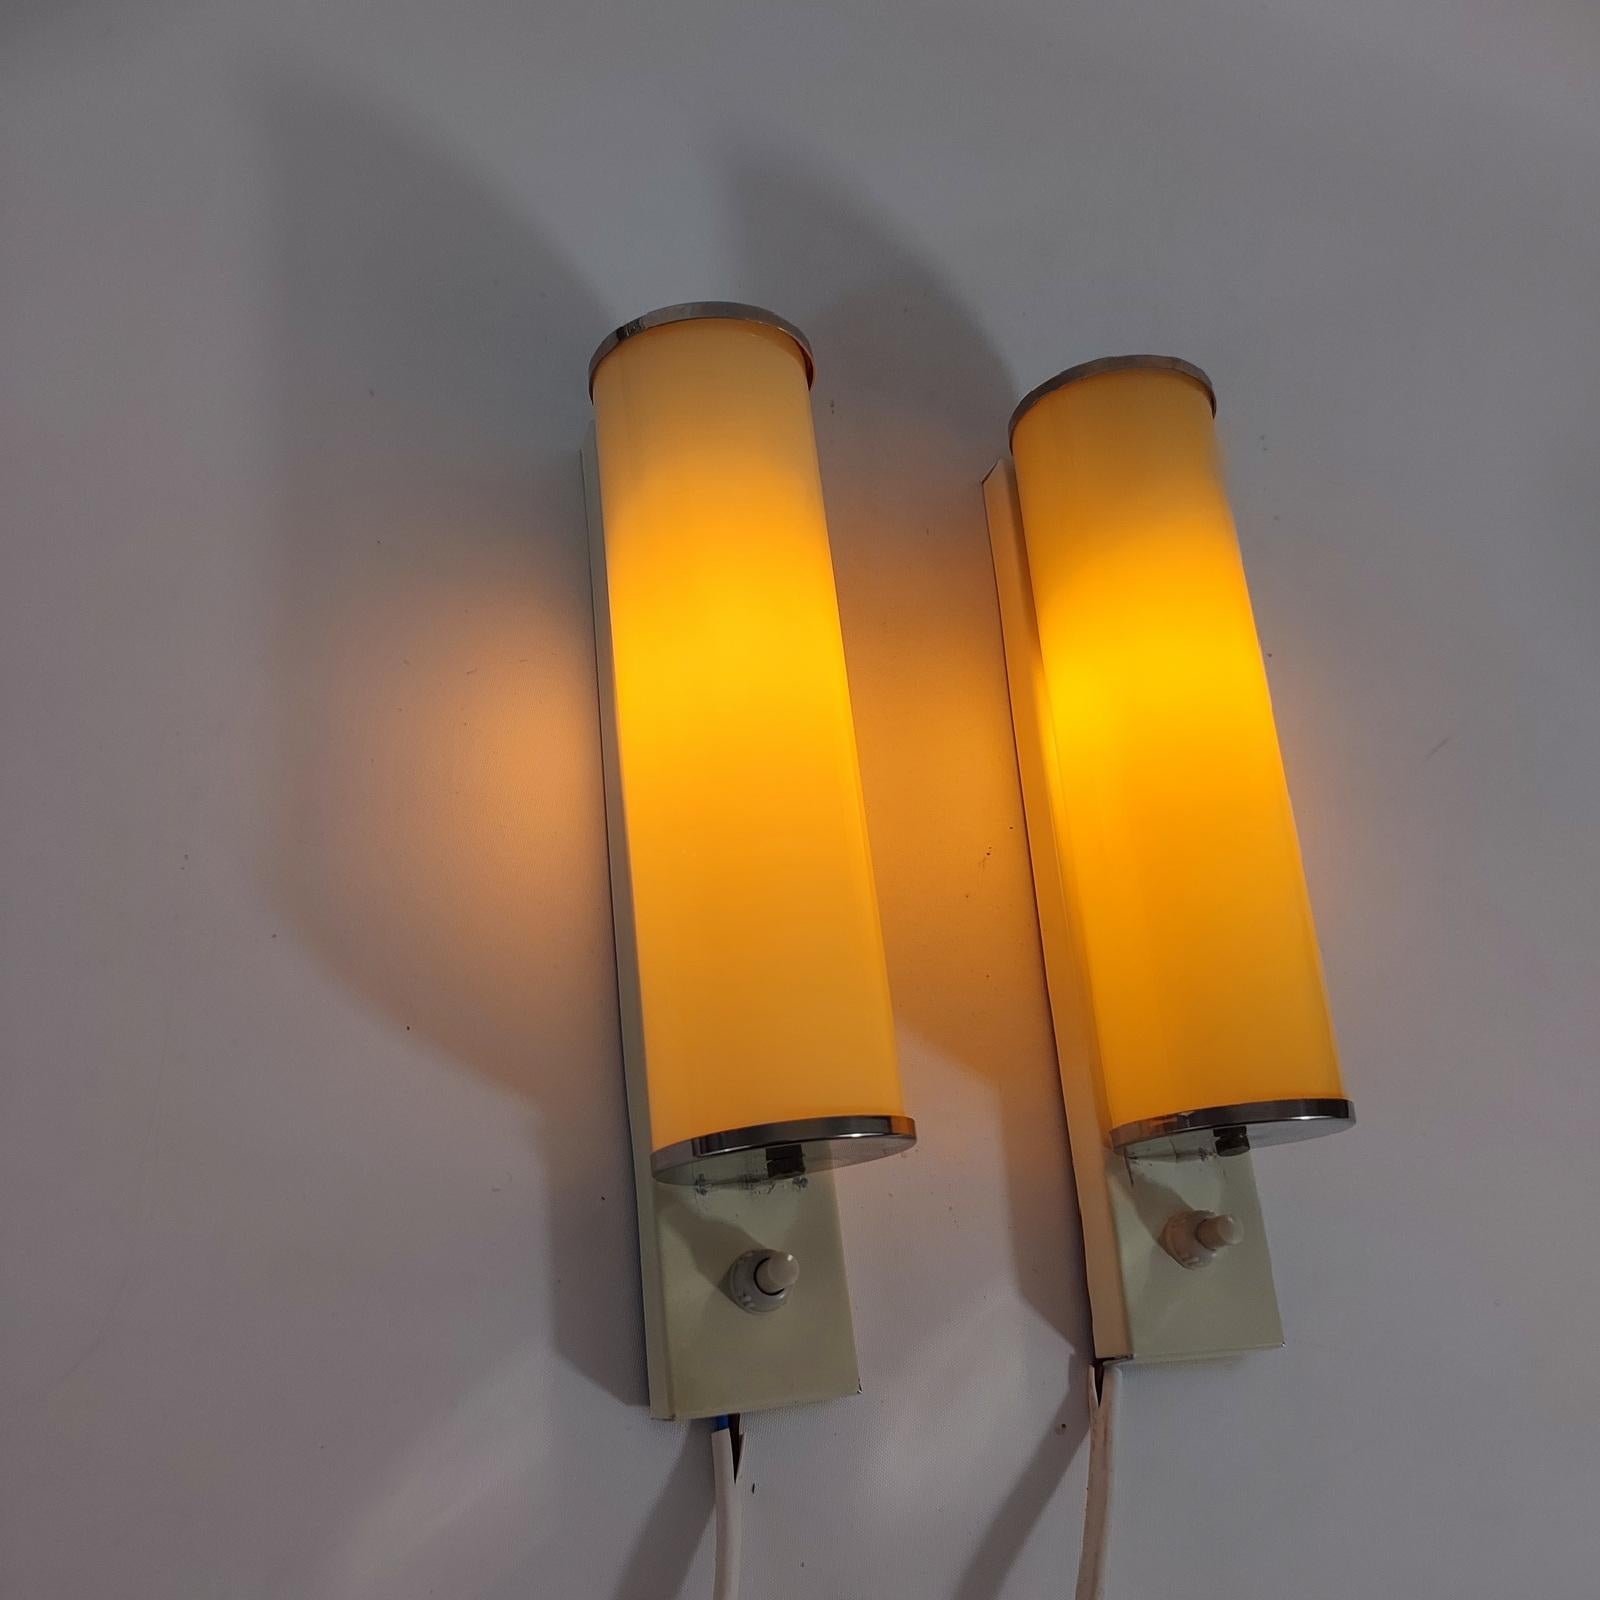 Pair of cylindrical sconces with cased glass shades, and switch-on to the bottom, from the 1930s-40s, in Bauhaus / Art Deco style.

Simple and elegant pieces with metal wall plates and end caps, which house cased-glass shades with an outer layer of